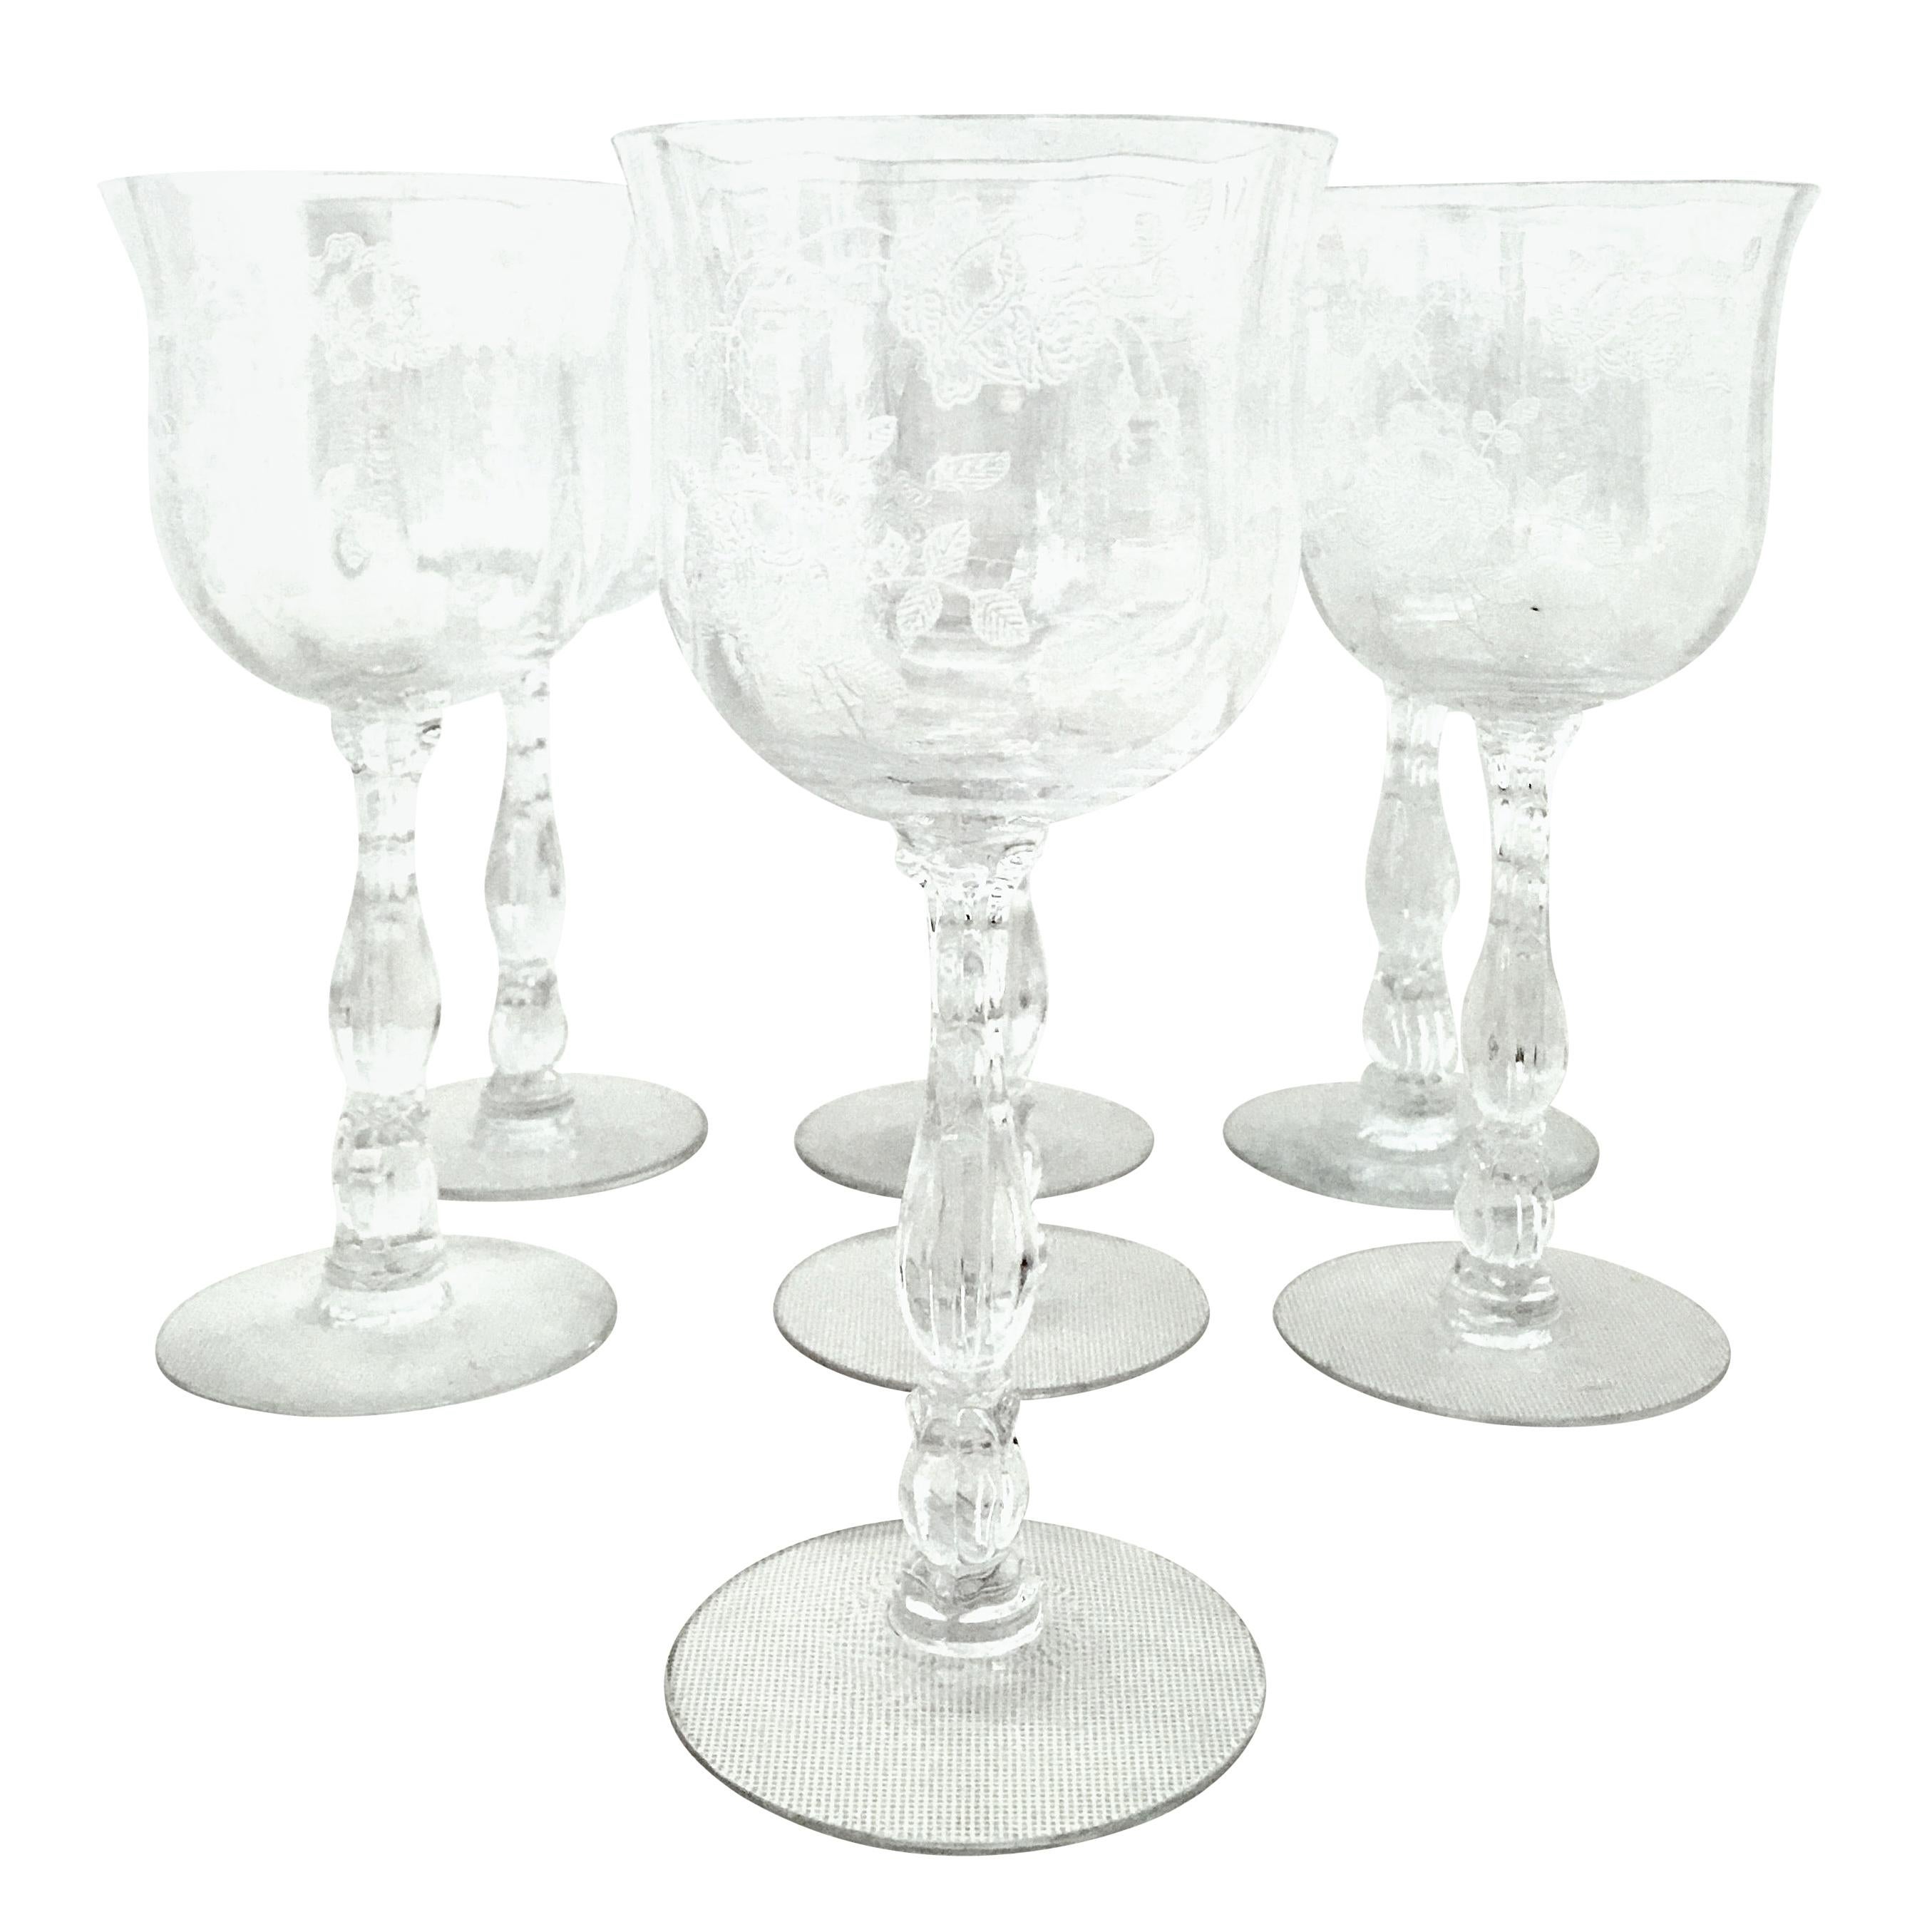 Mid-20th Century American Etched Crystal Stem Glasses Set of Seven Pieces For Sale